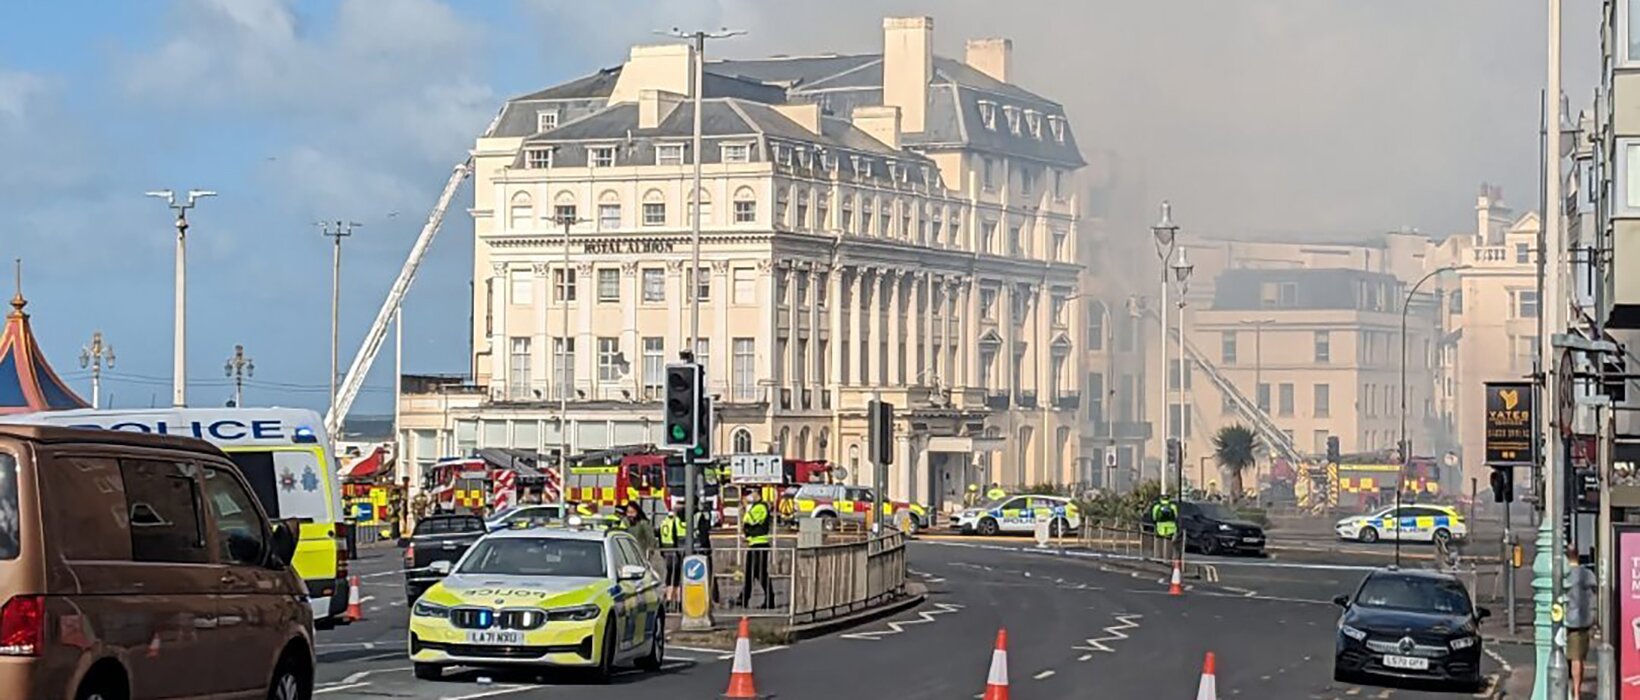 Britannia Hotels to be charged for demolition costs following Brighton hotel fire 